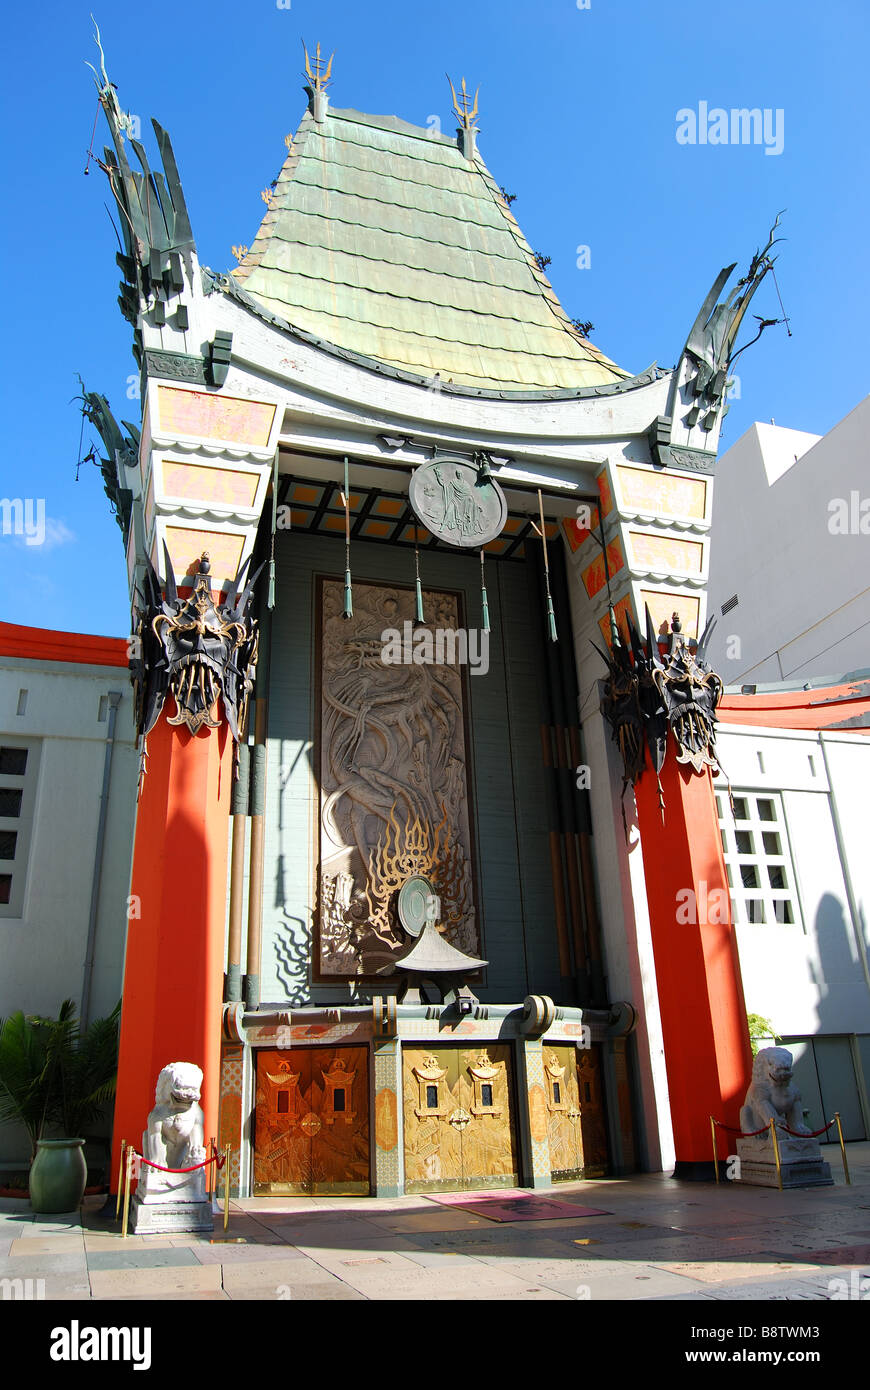 Entrance to TCL Grauman's Chinese Theatre, Hollywood Boulevard, Hollywood, Los Angeles, California, United States of America Stock Photo